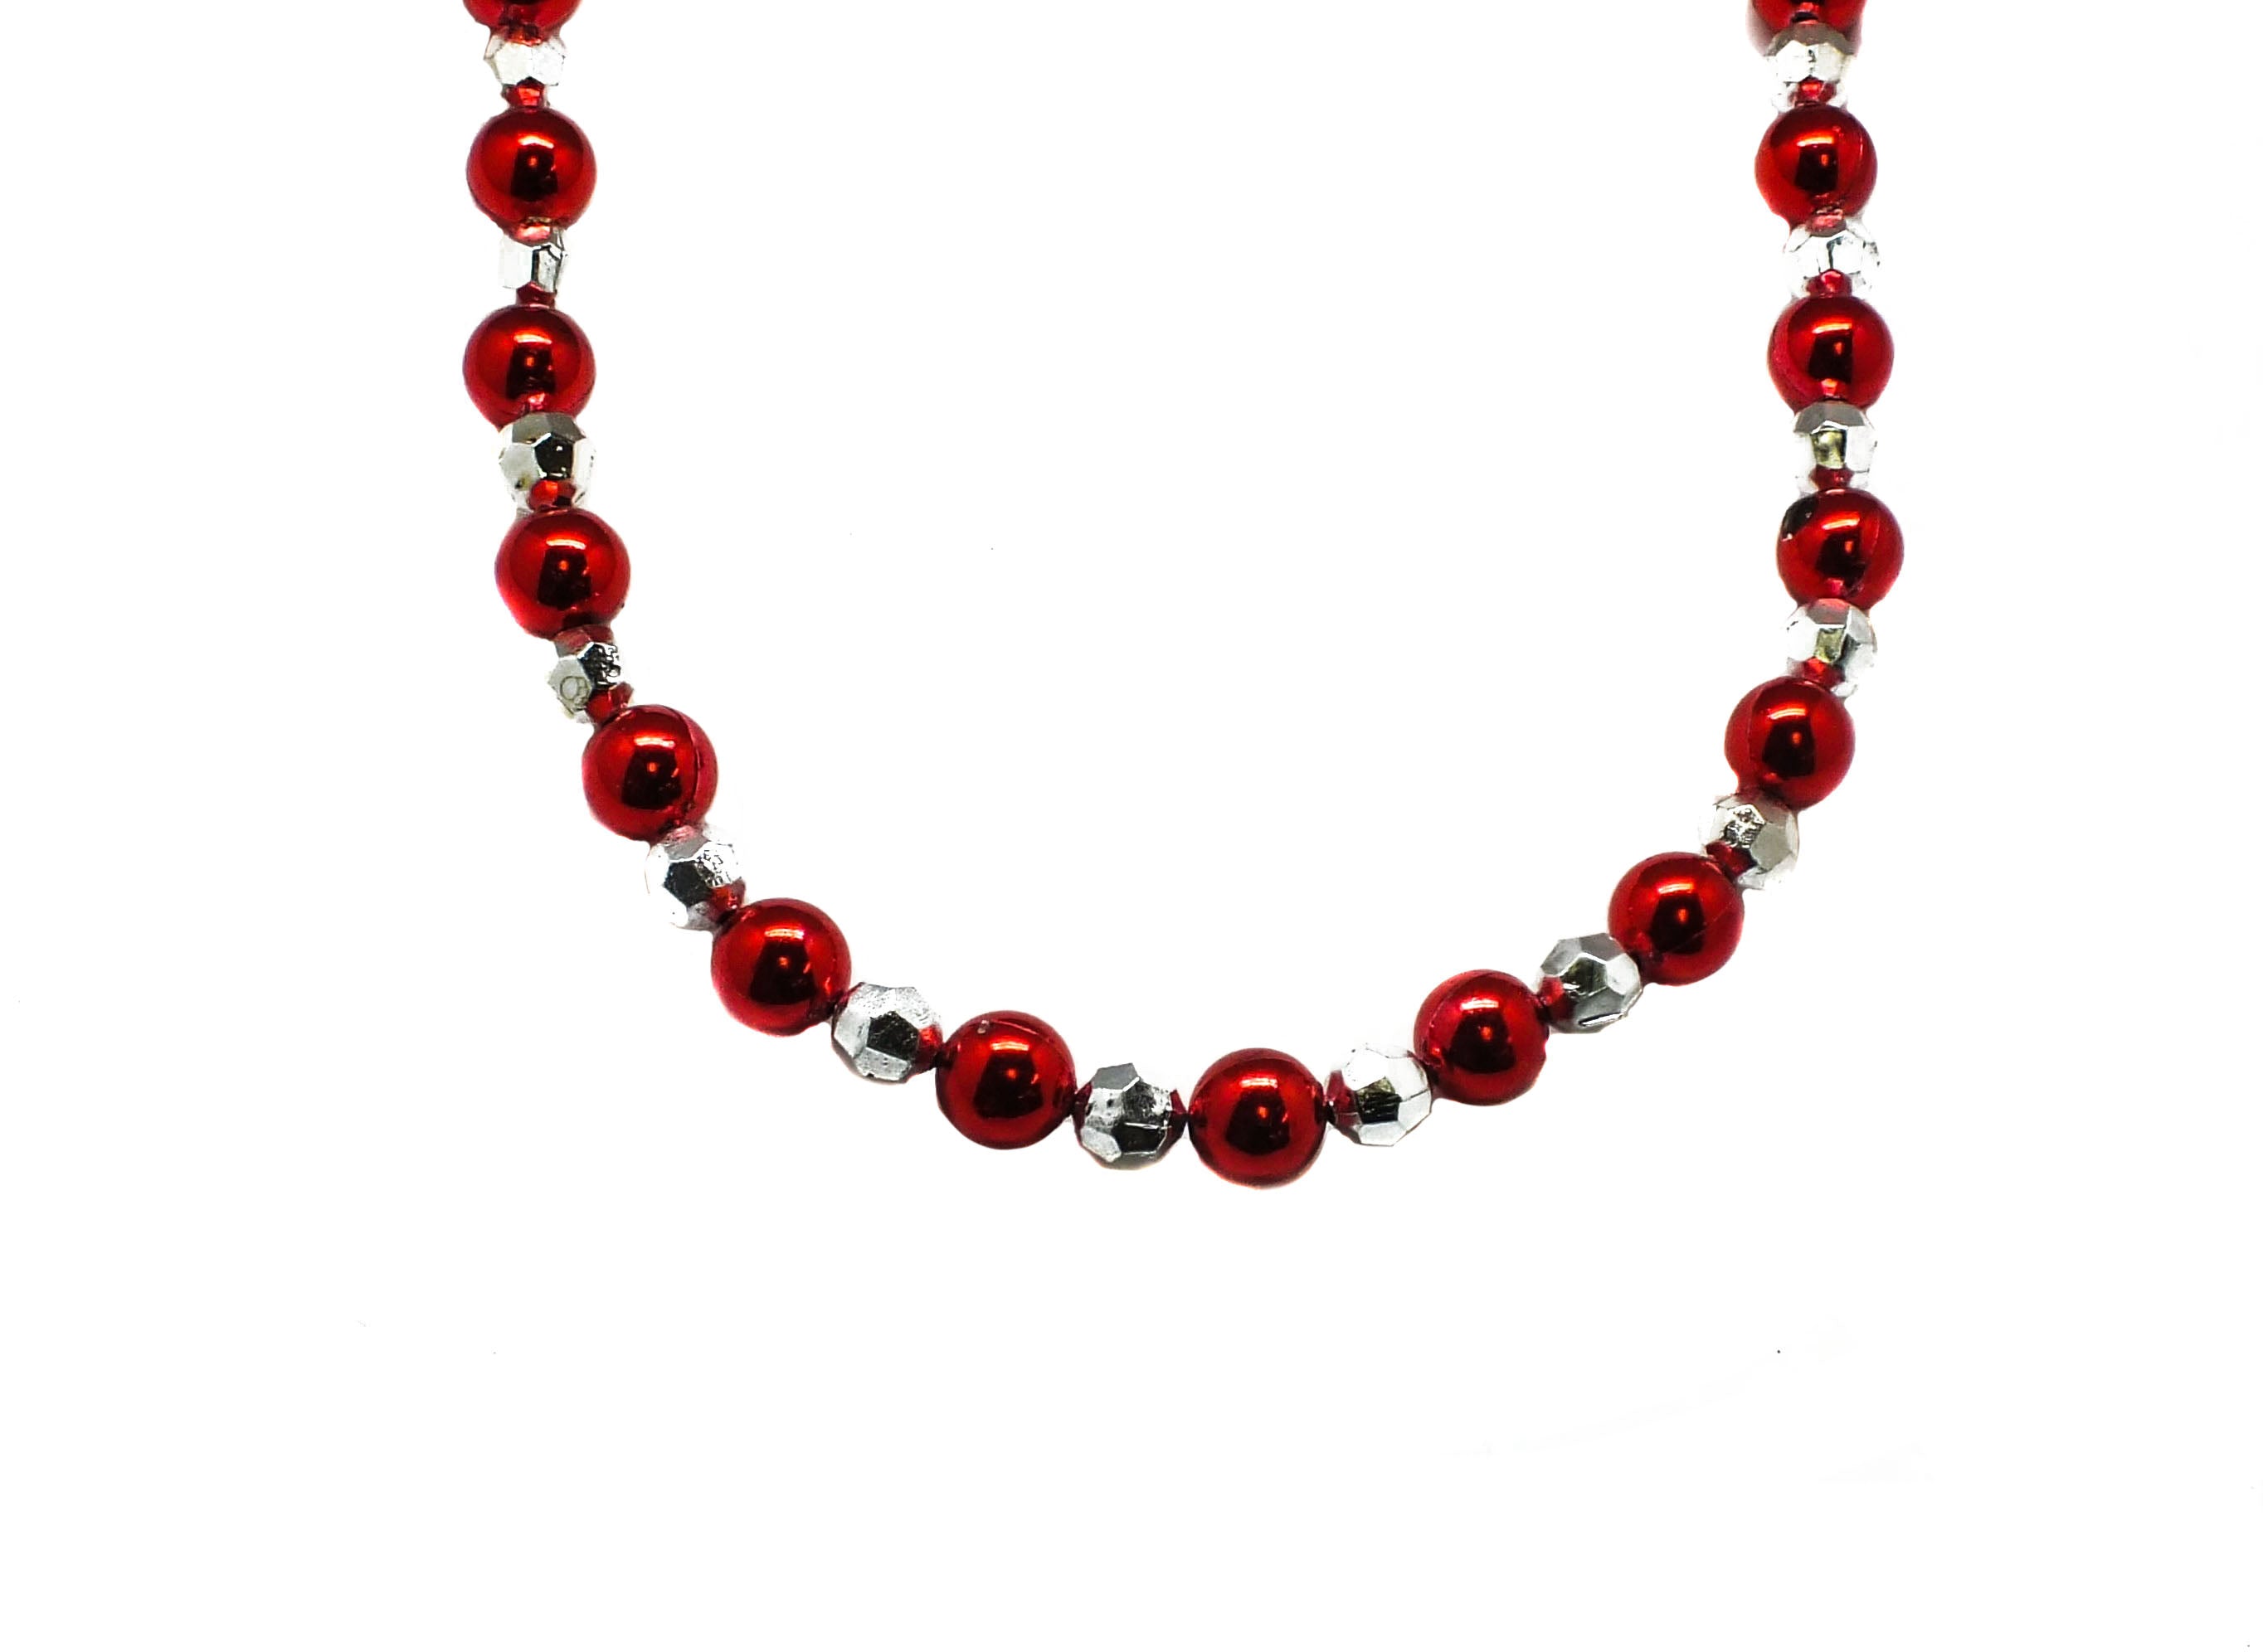 36 18mm Round Red Bead 14mm Round Silver Bead